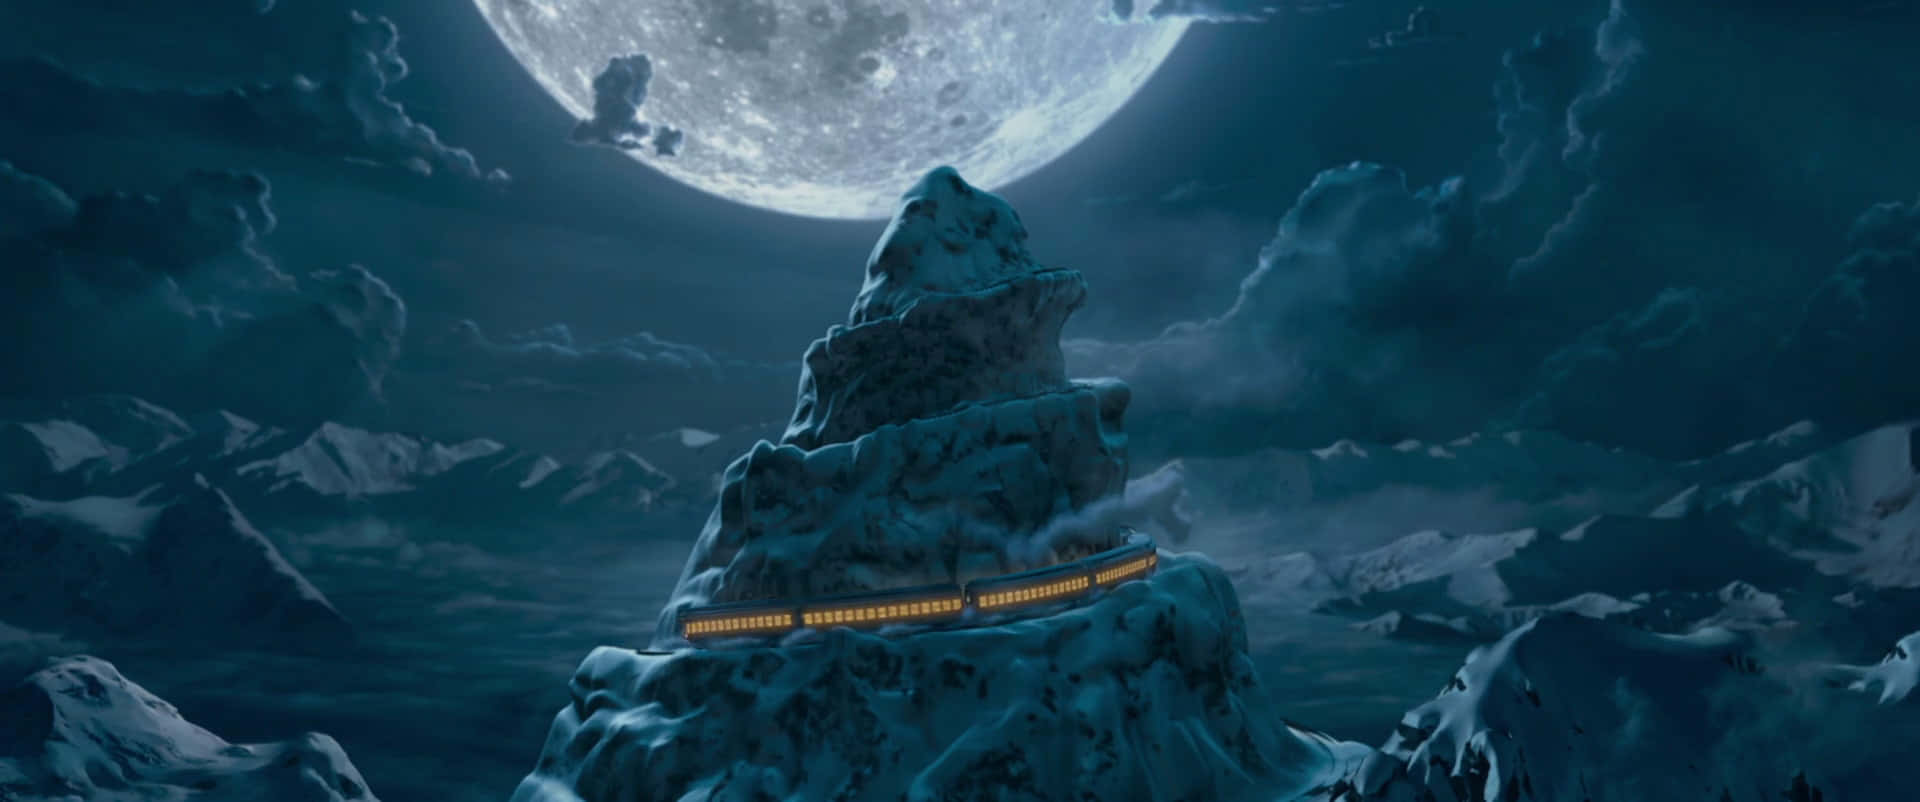 Take a Magical Journey on the Polar Express